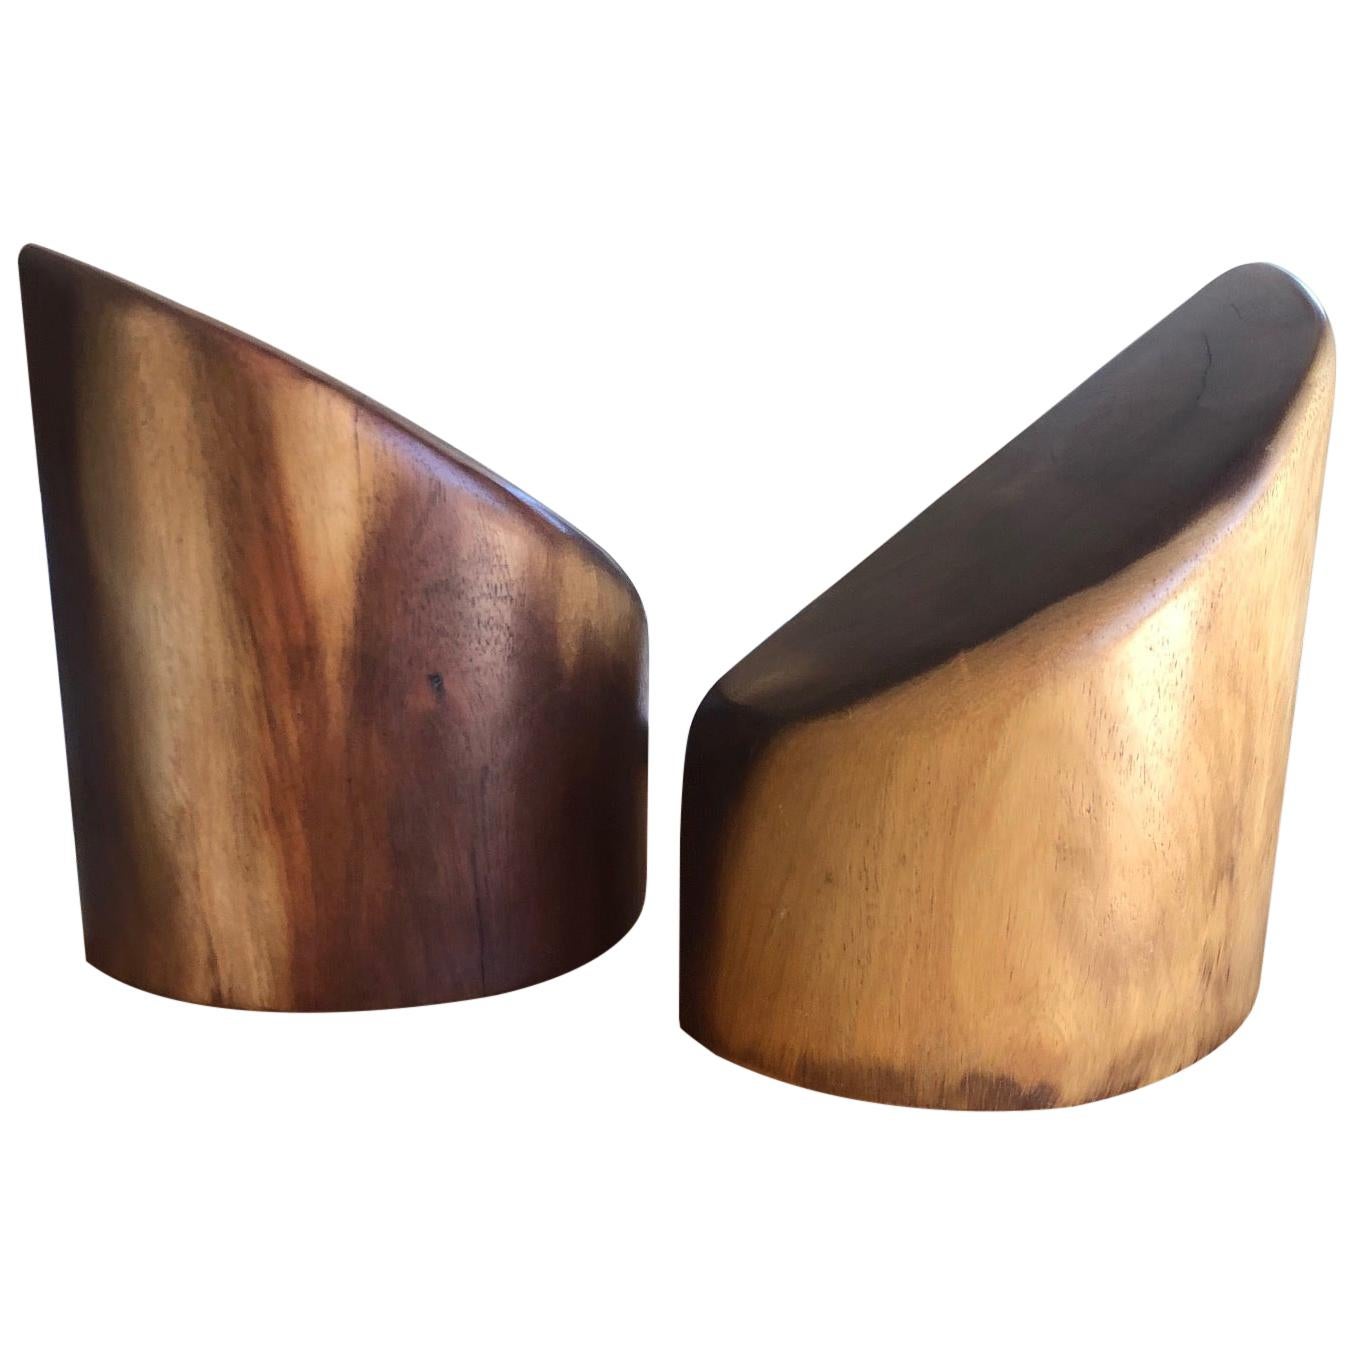 Vintage Don Shoemaker Rosewood Bookends, circa 1960s